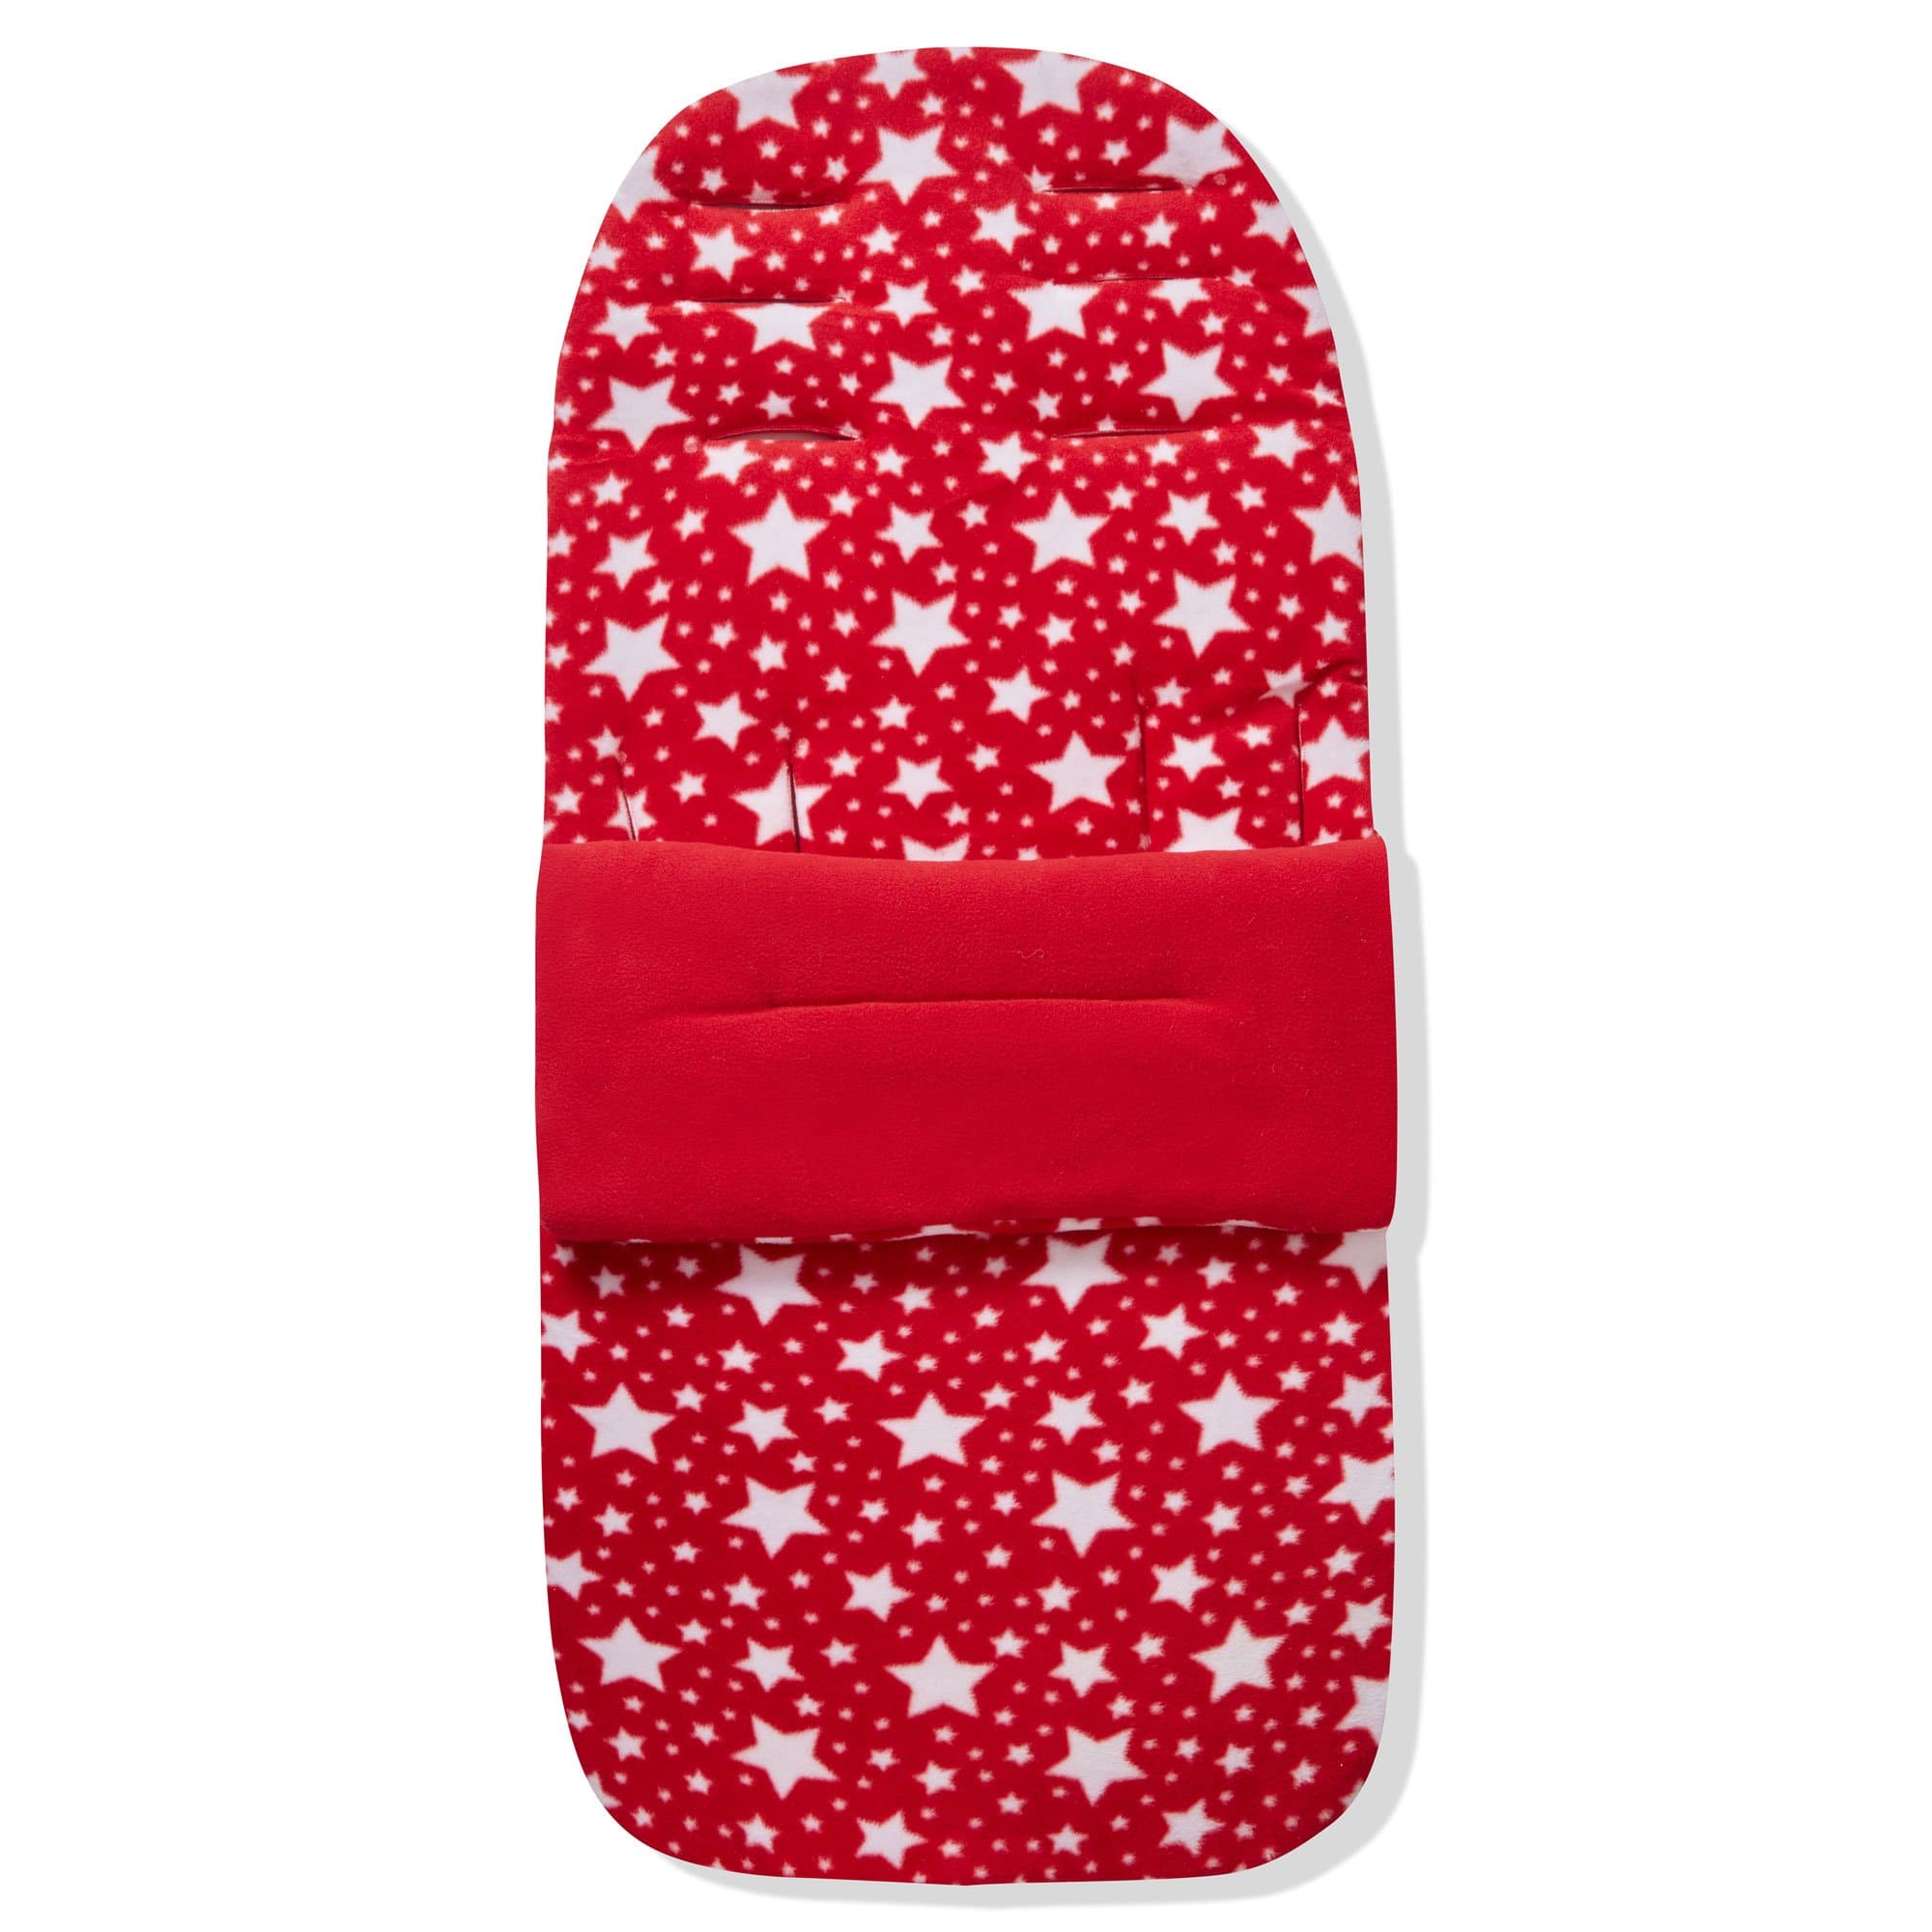 Fleece Footmuff / Cosy Toes Compatible with Jane - Red Star / Fits All Models | For Your Little One